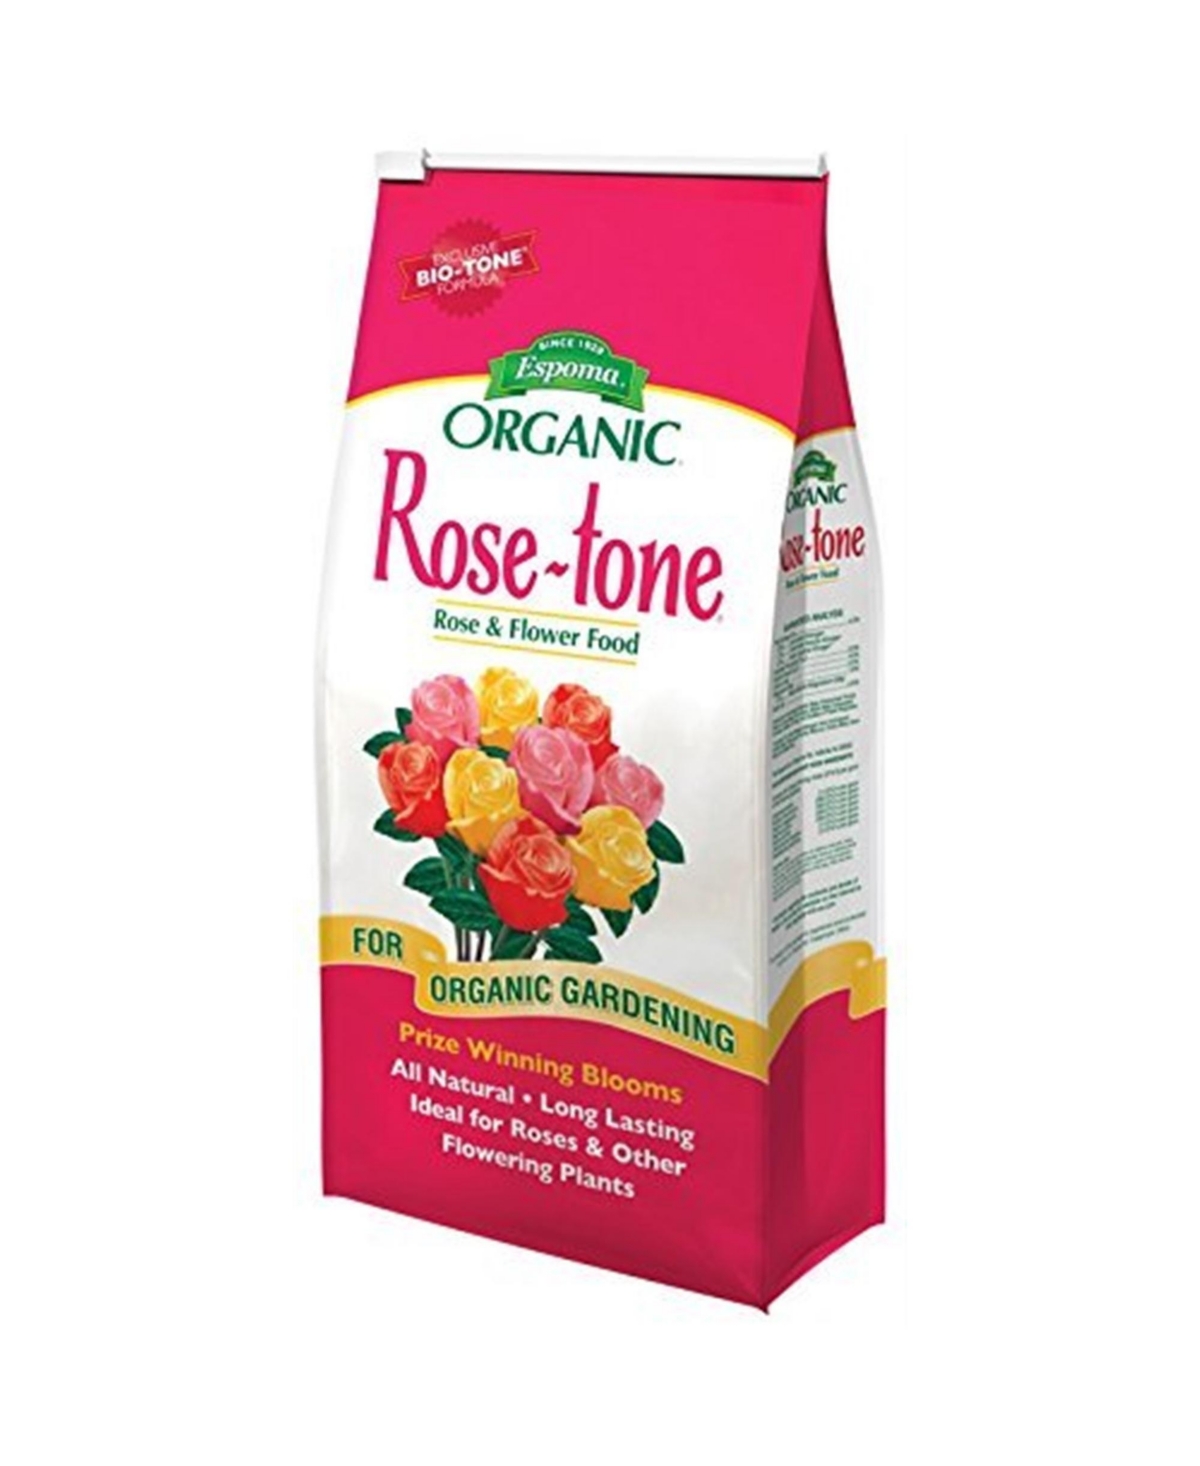 Organic Rose-tone Rose & Flower Food, 4 lbs - Open Miscellaneous